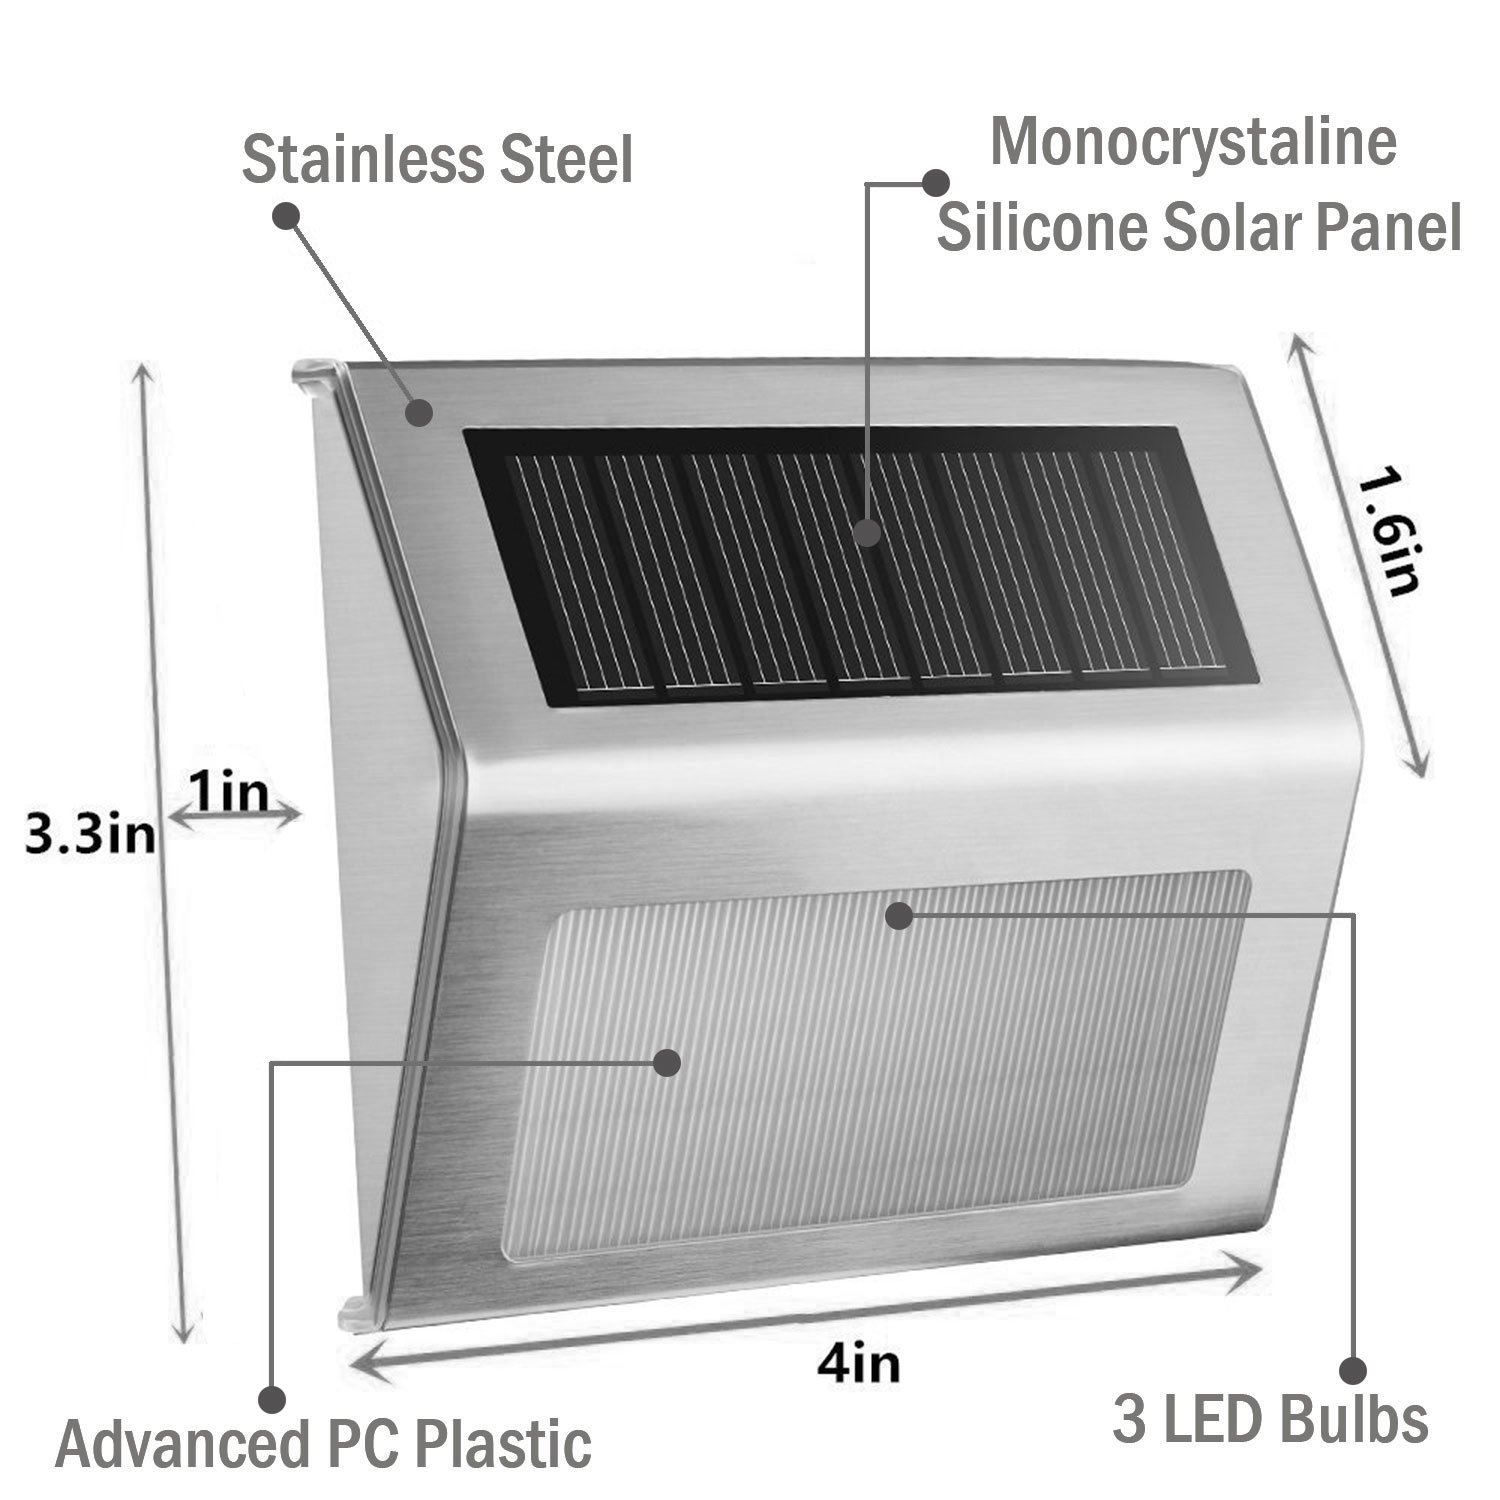 Solar Stair Light, EpicGadget Waterproof Outdoor LED Step Lighting 3 LED Solar Powered Step Lights Stainless Steel Outdoor Lighting for Steps Paths Patio Stairs (6 Pack) - image 2 of 5